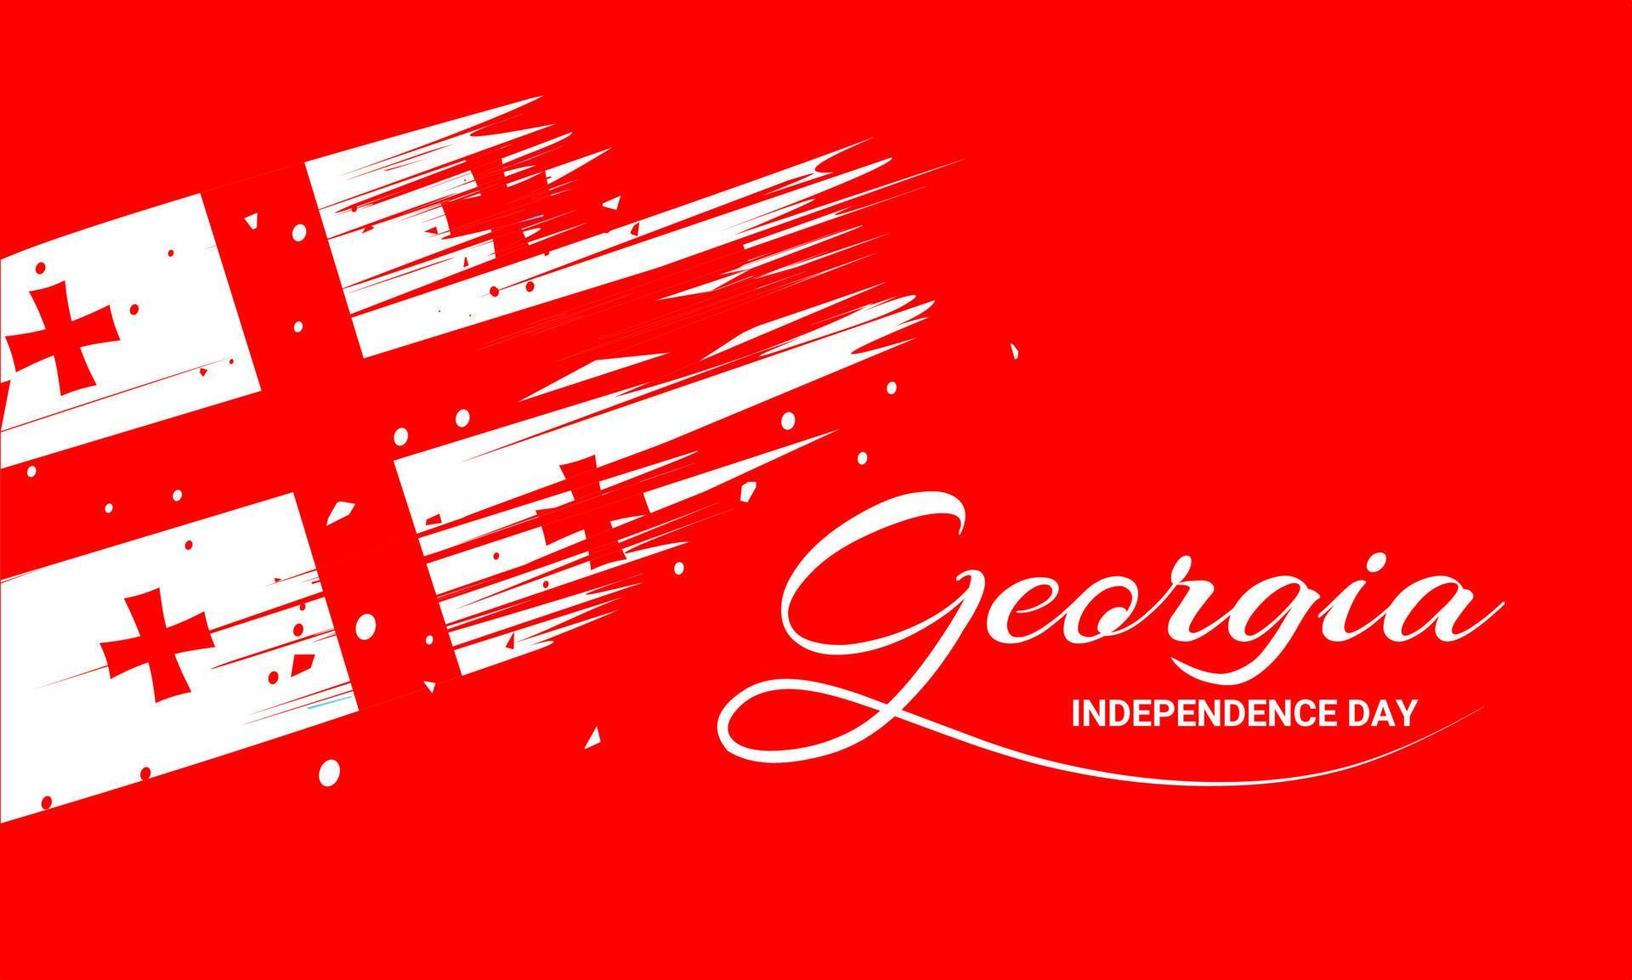 Georgian Independence Day, banner design with abstract flag, brush strokes. vector illustration.